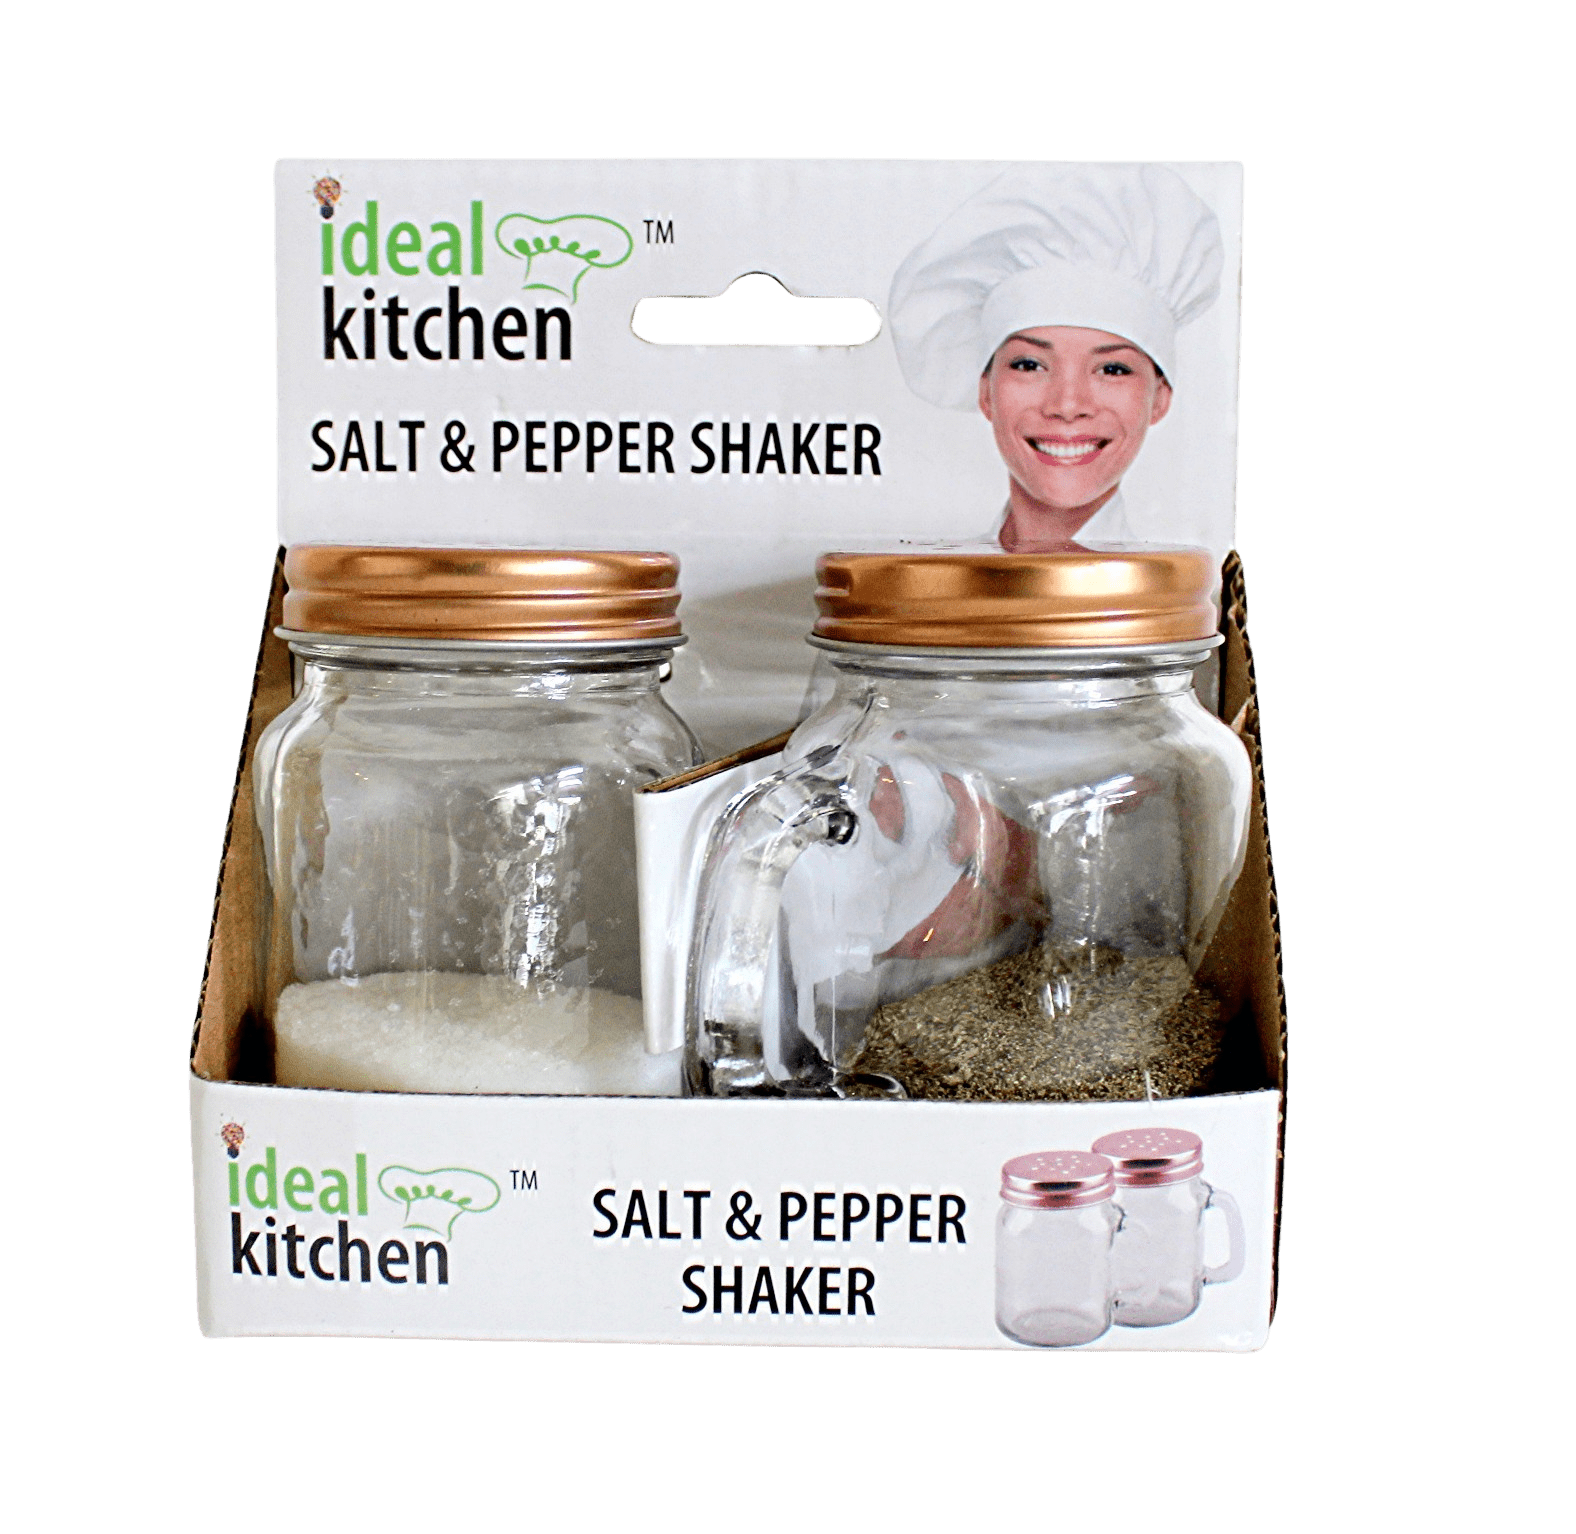 Salt and Pepper Shaker Set - Mason Jars with Handle Personalized Spices,  Shots